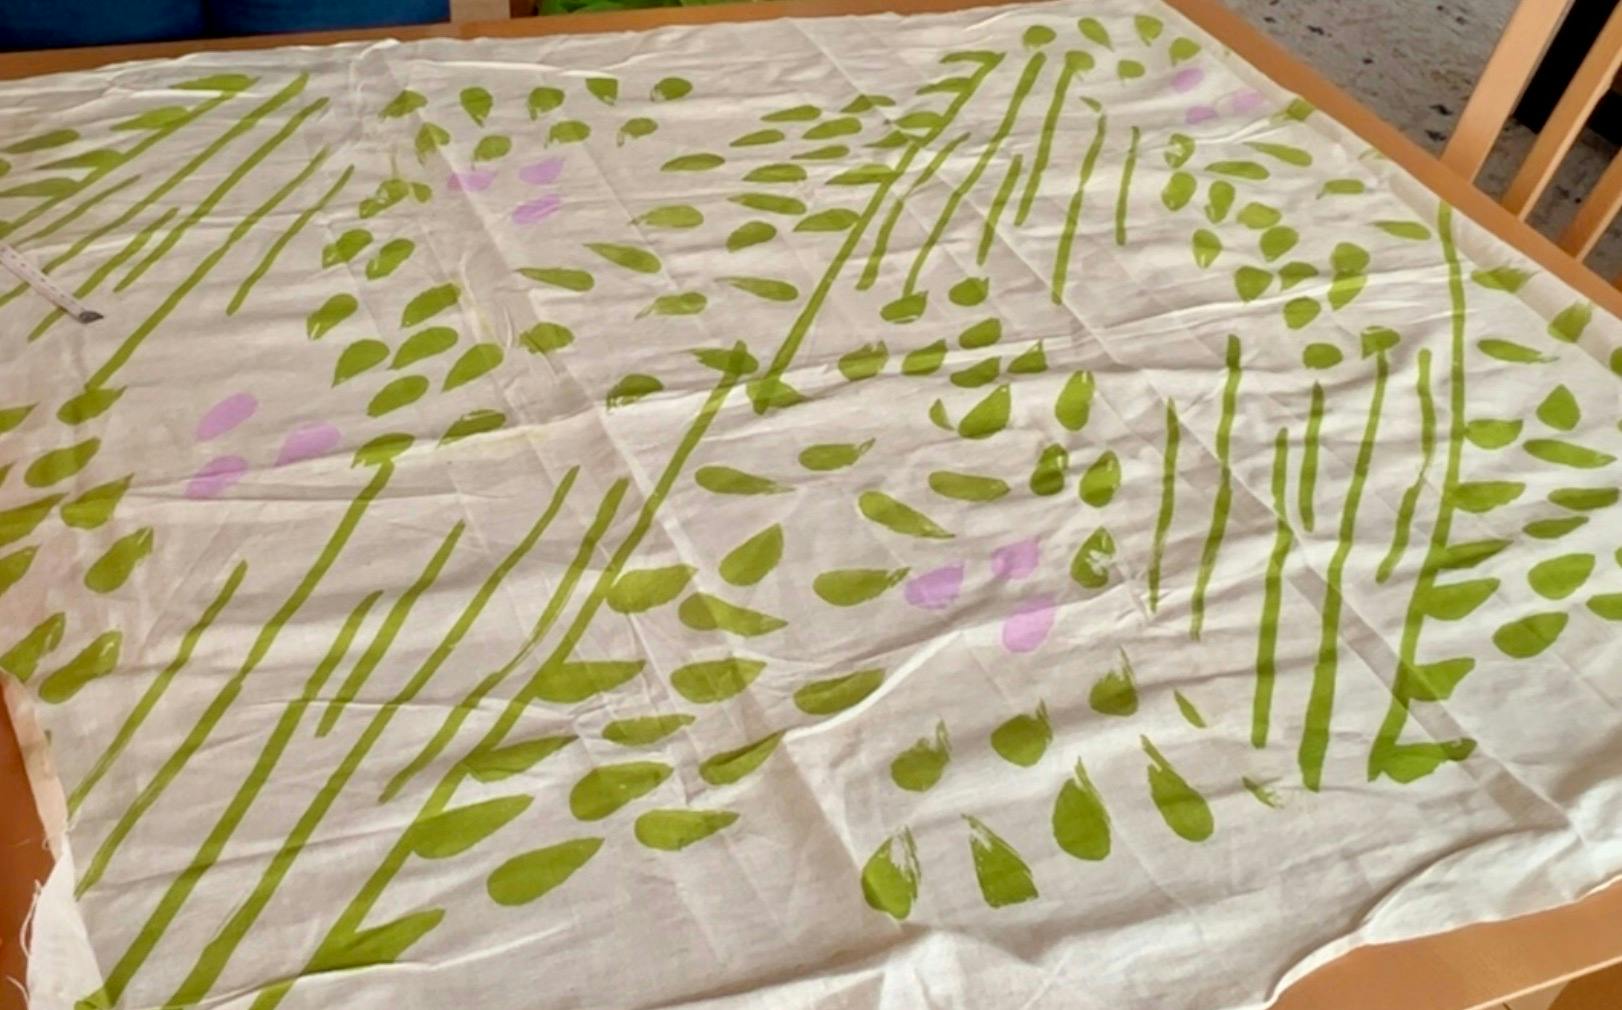 A piece of cream colored fabric with abstract brush stoke leaves and stems in green and purple is laid across a table.